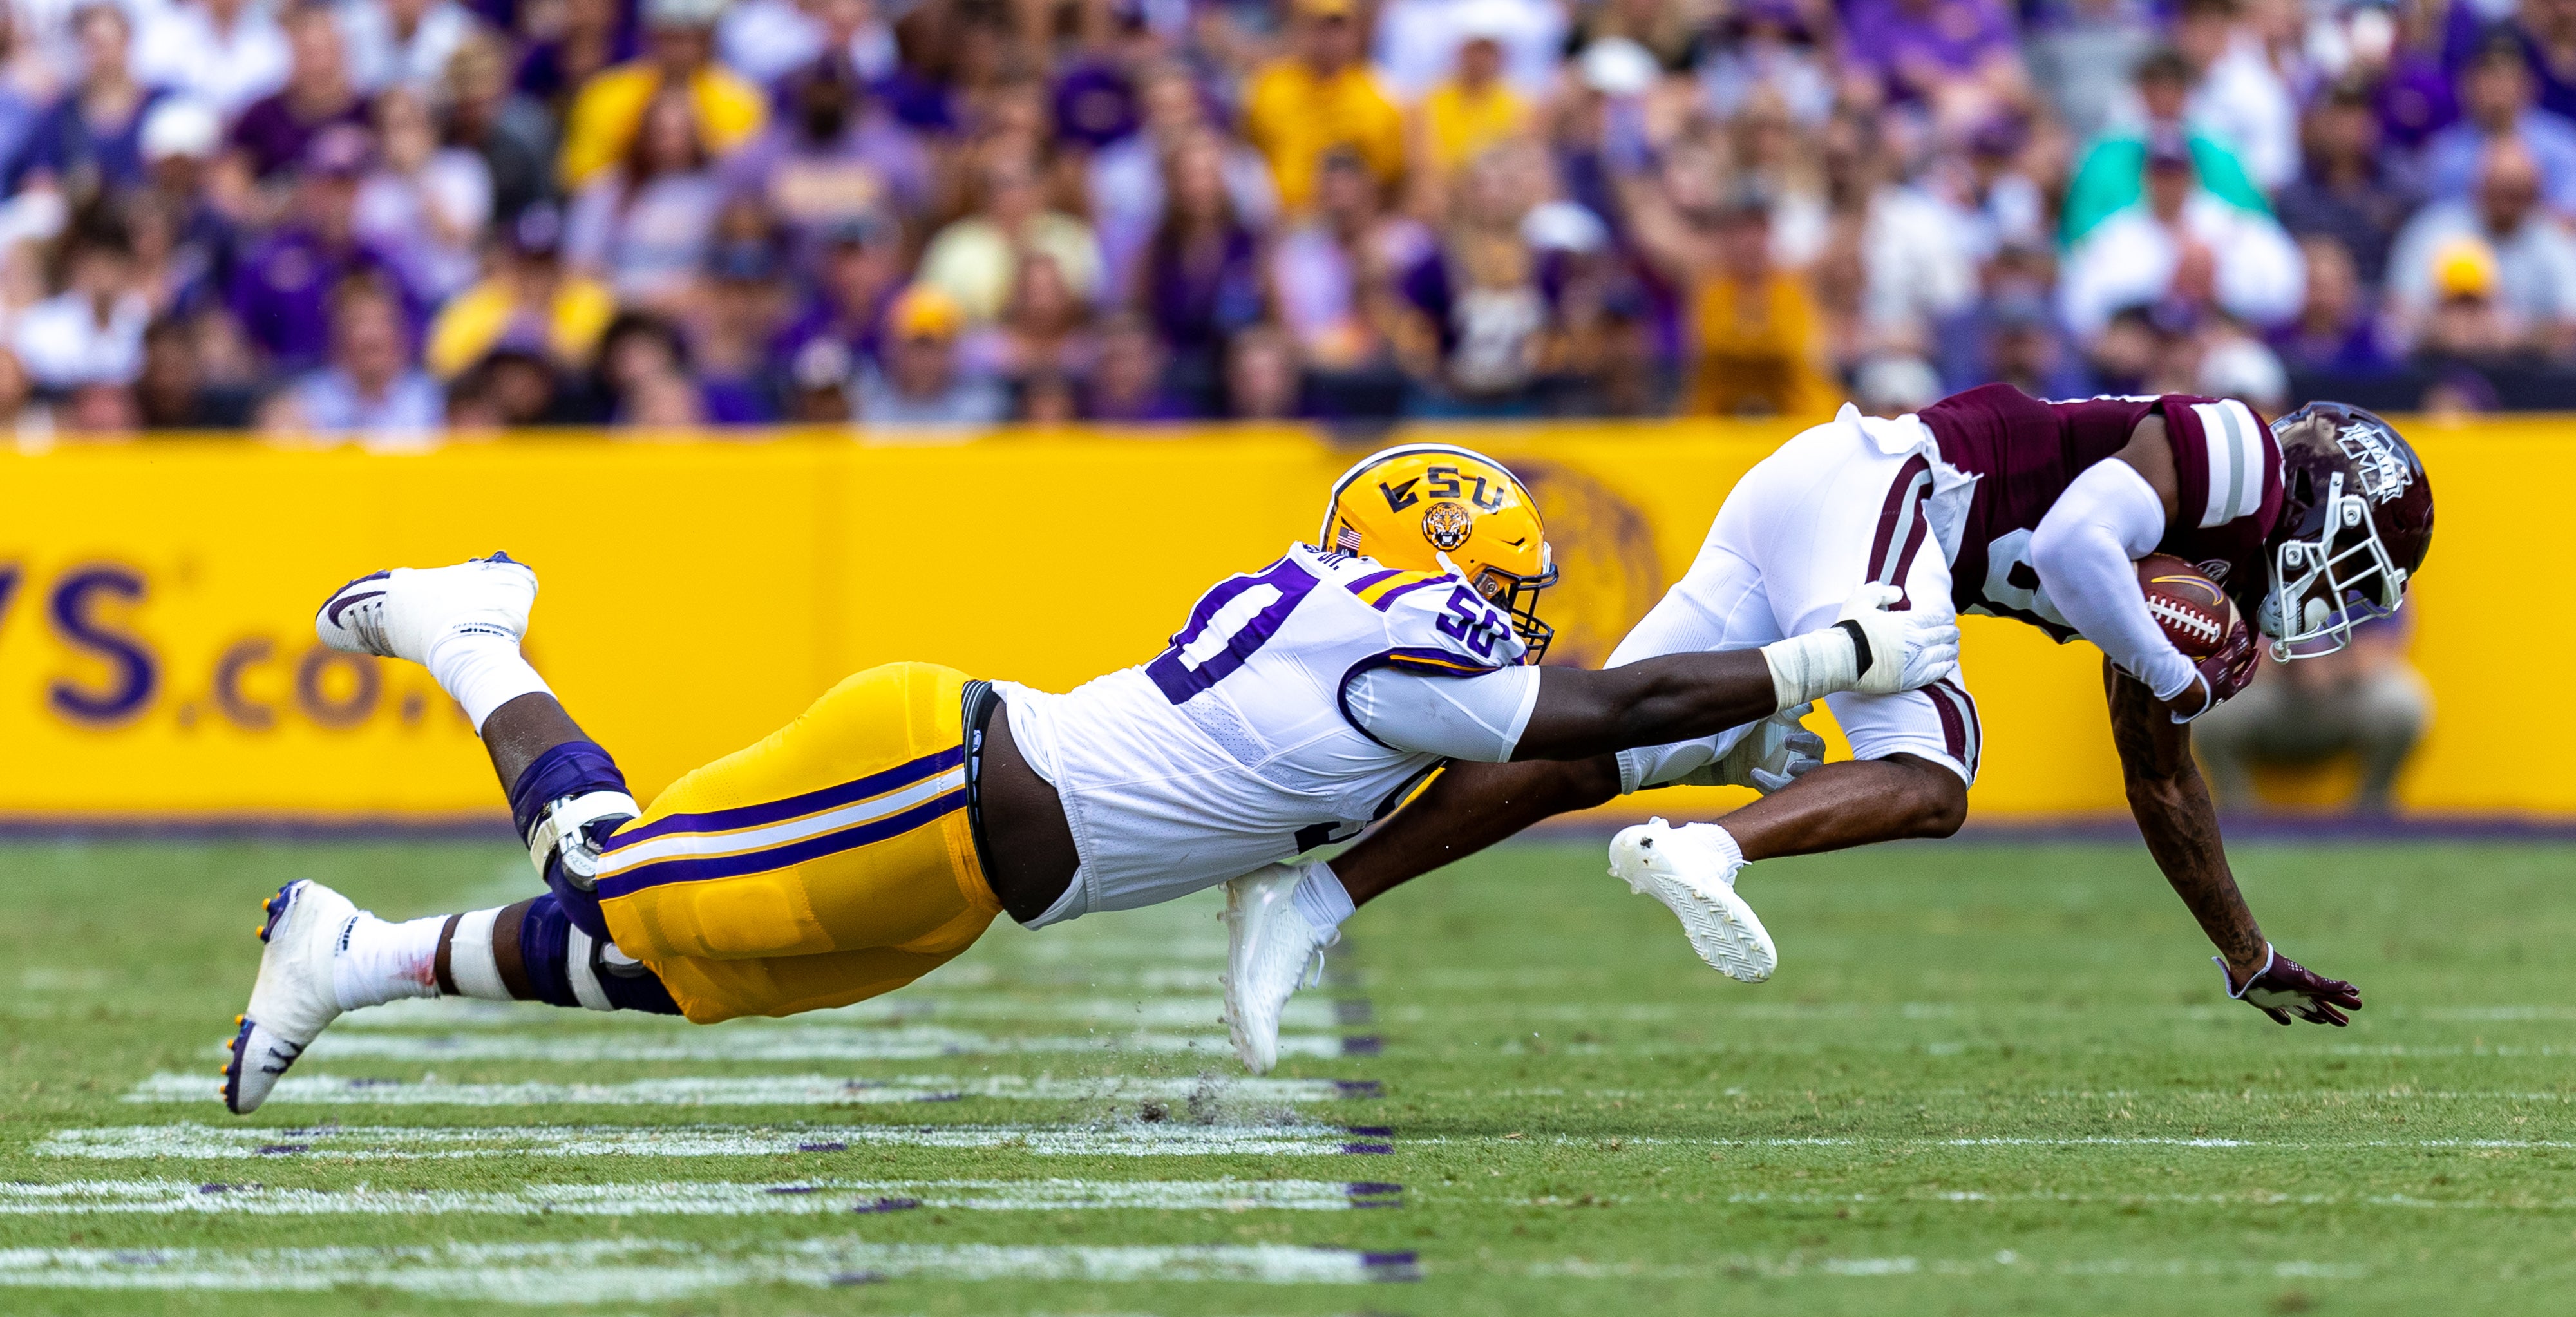 Emery Jones makes a tackle against Mississippi State 